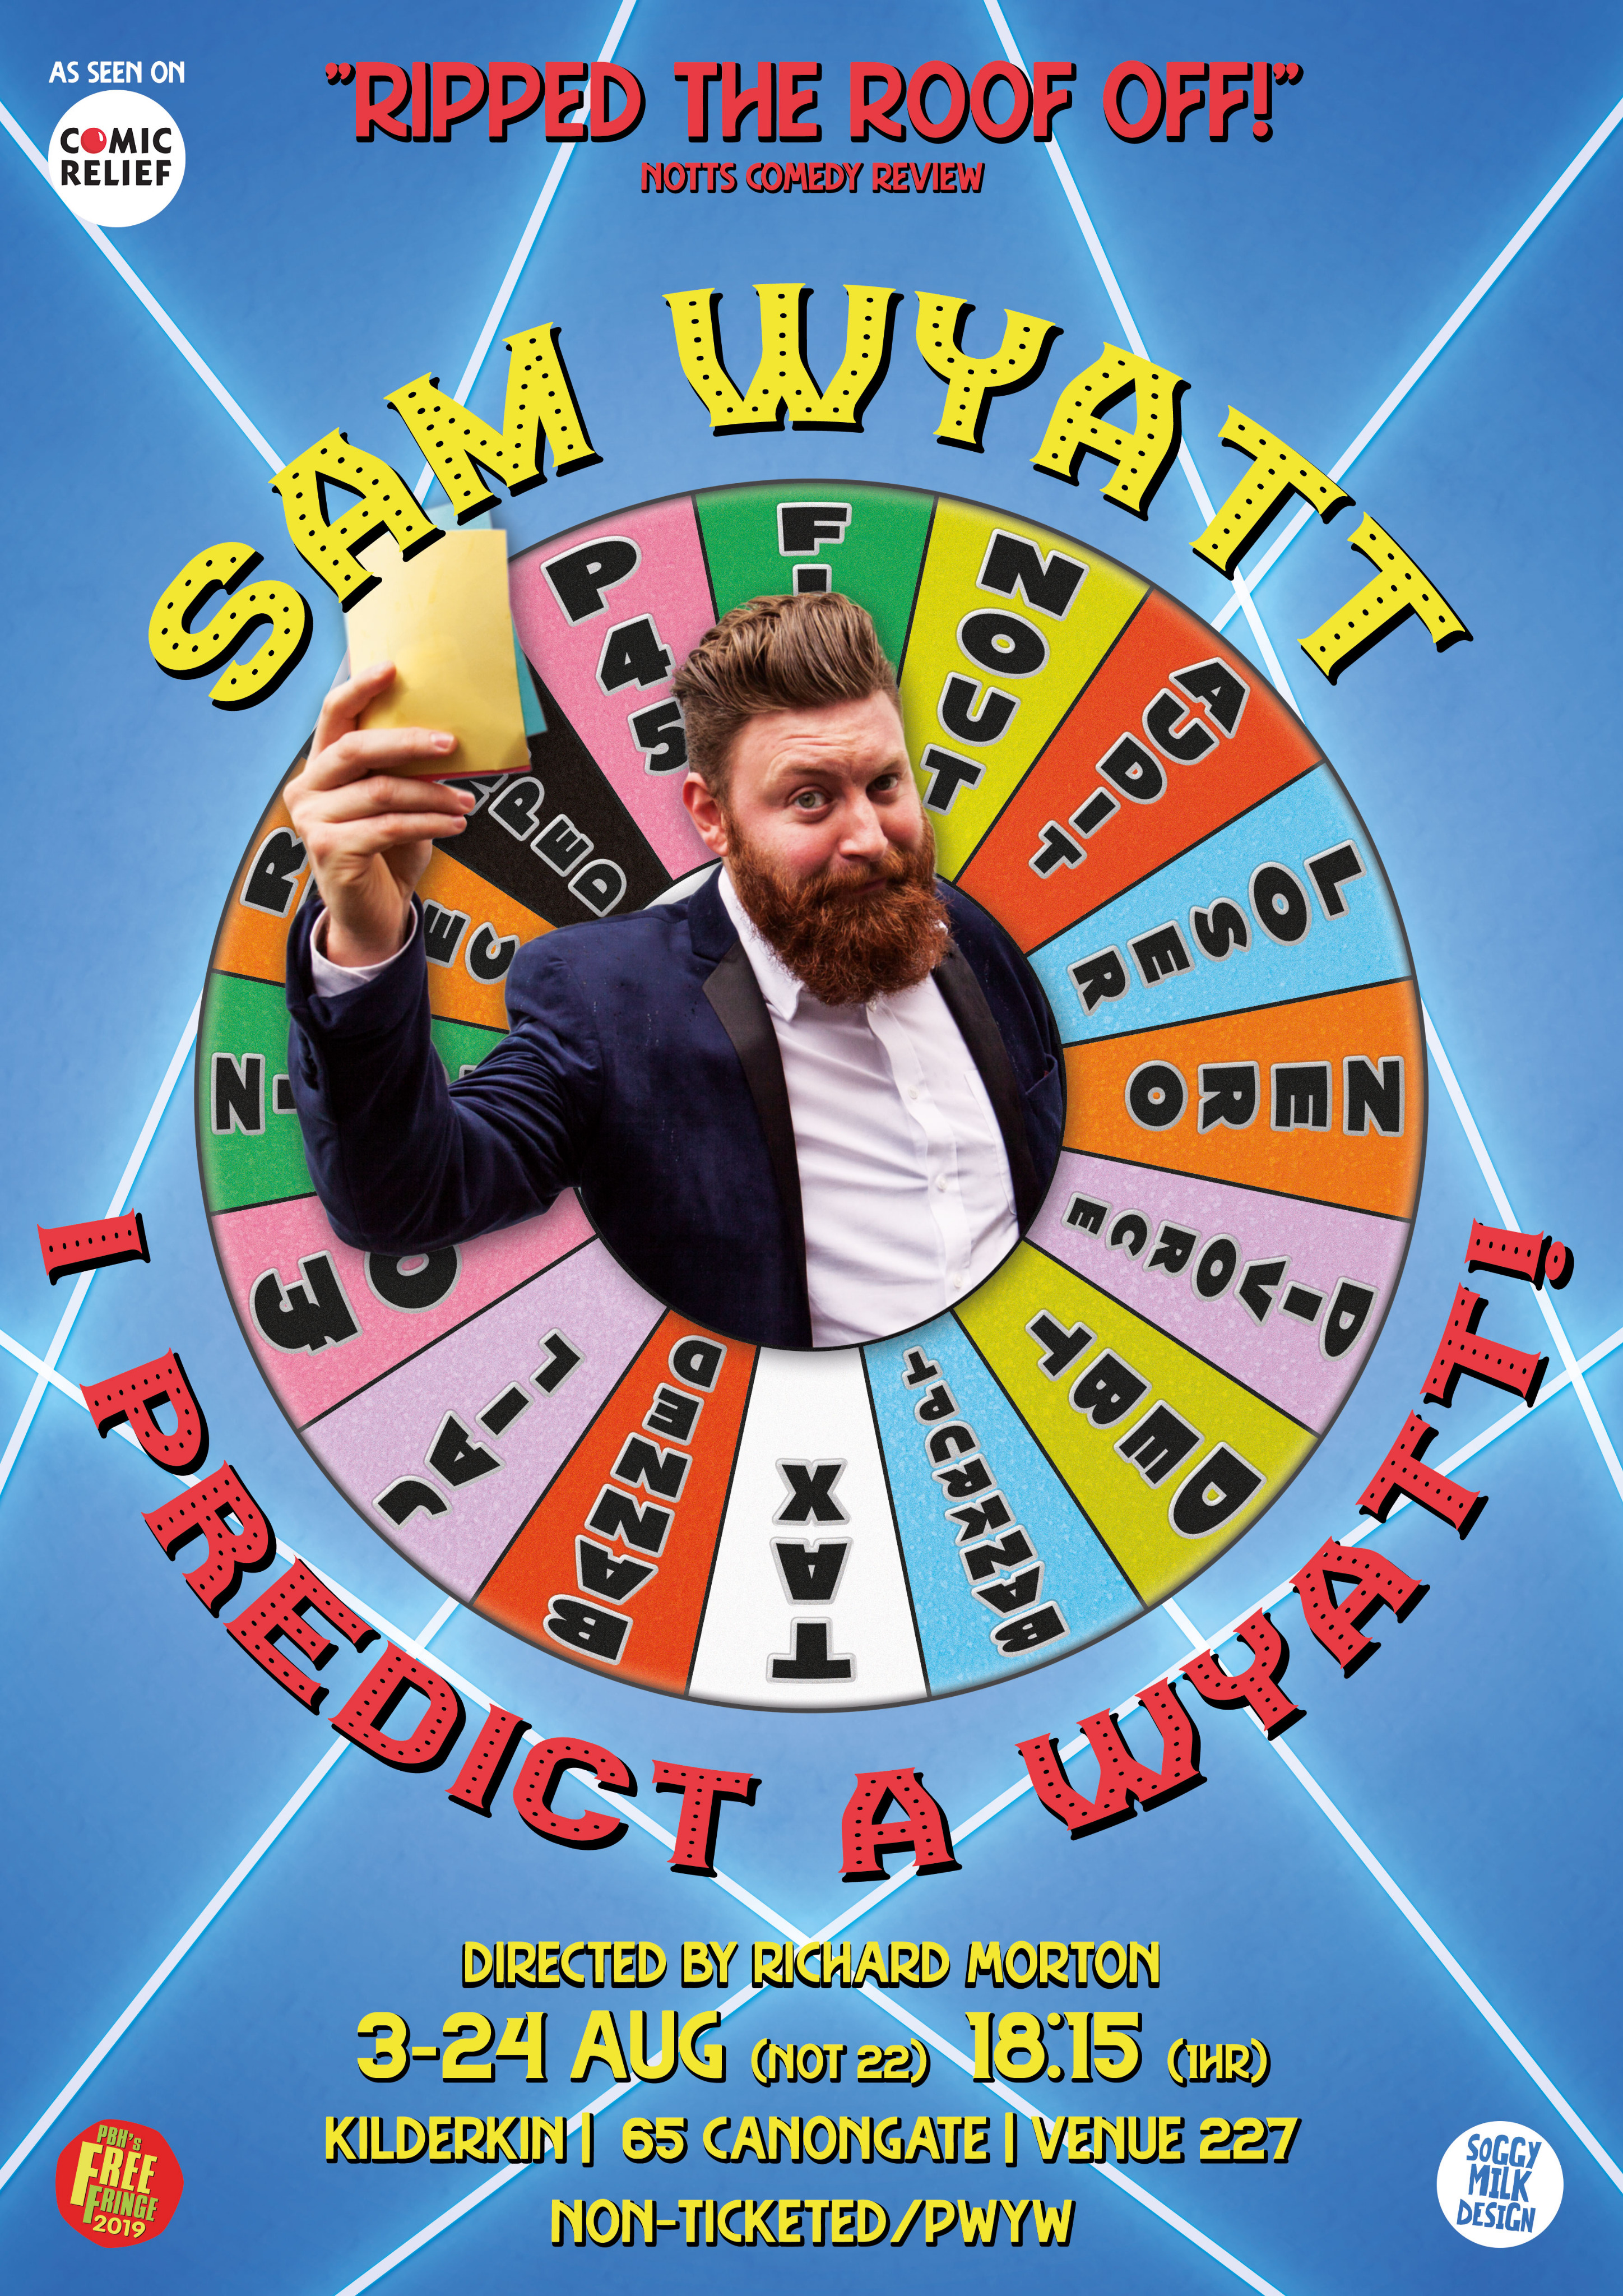 The poster for I Predict a Wyatt!